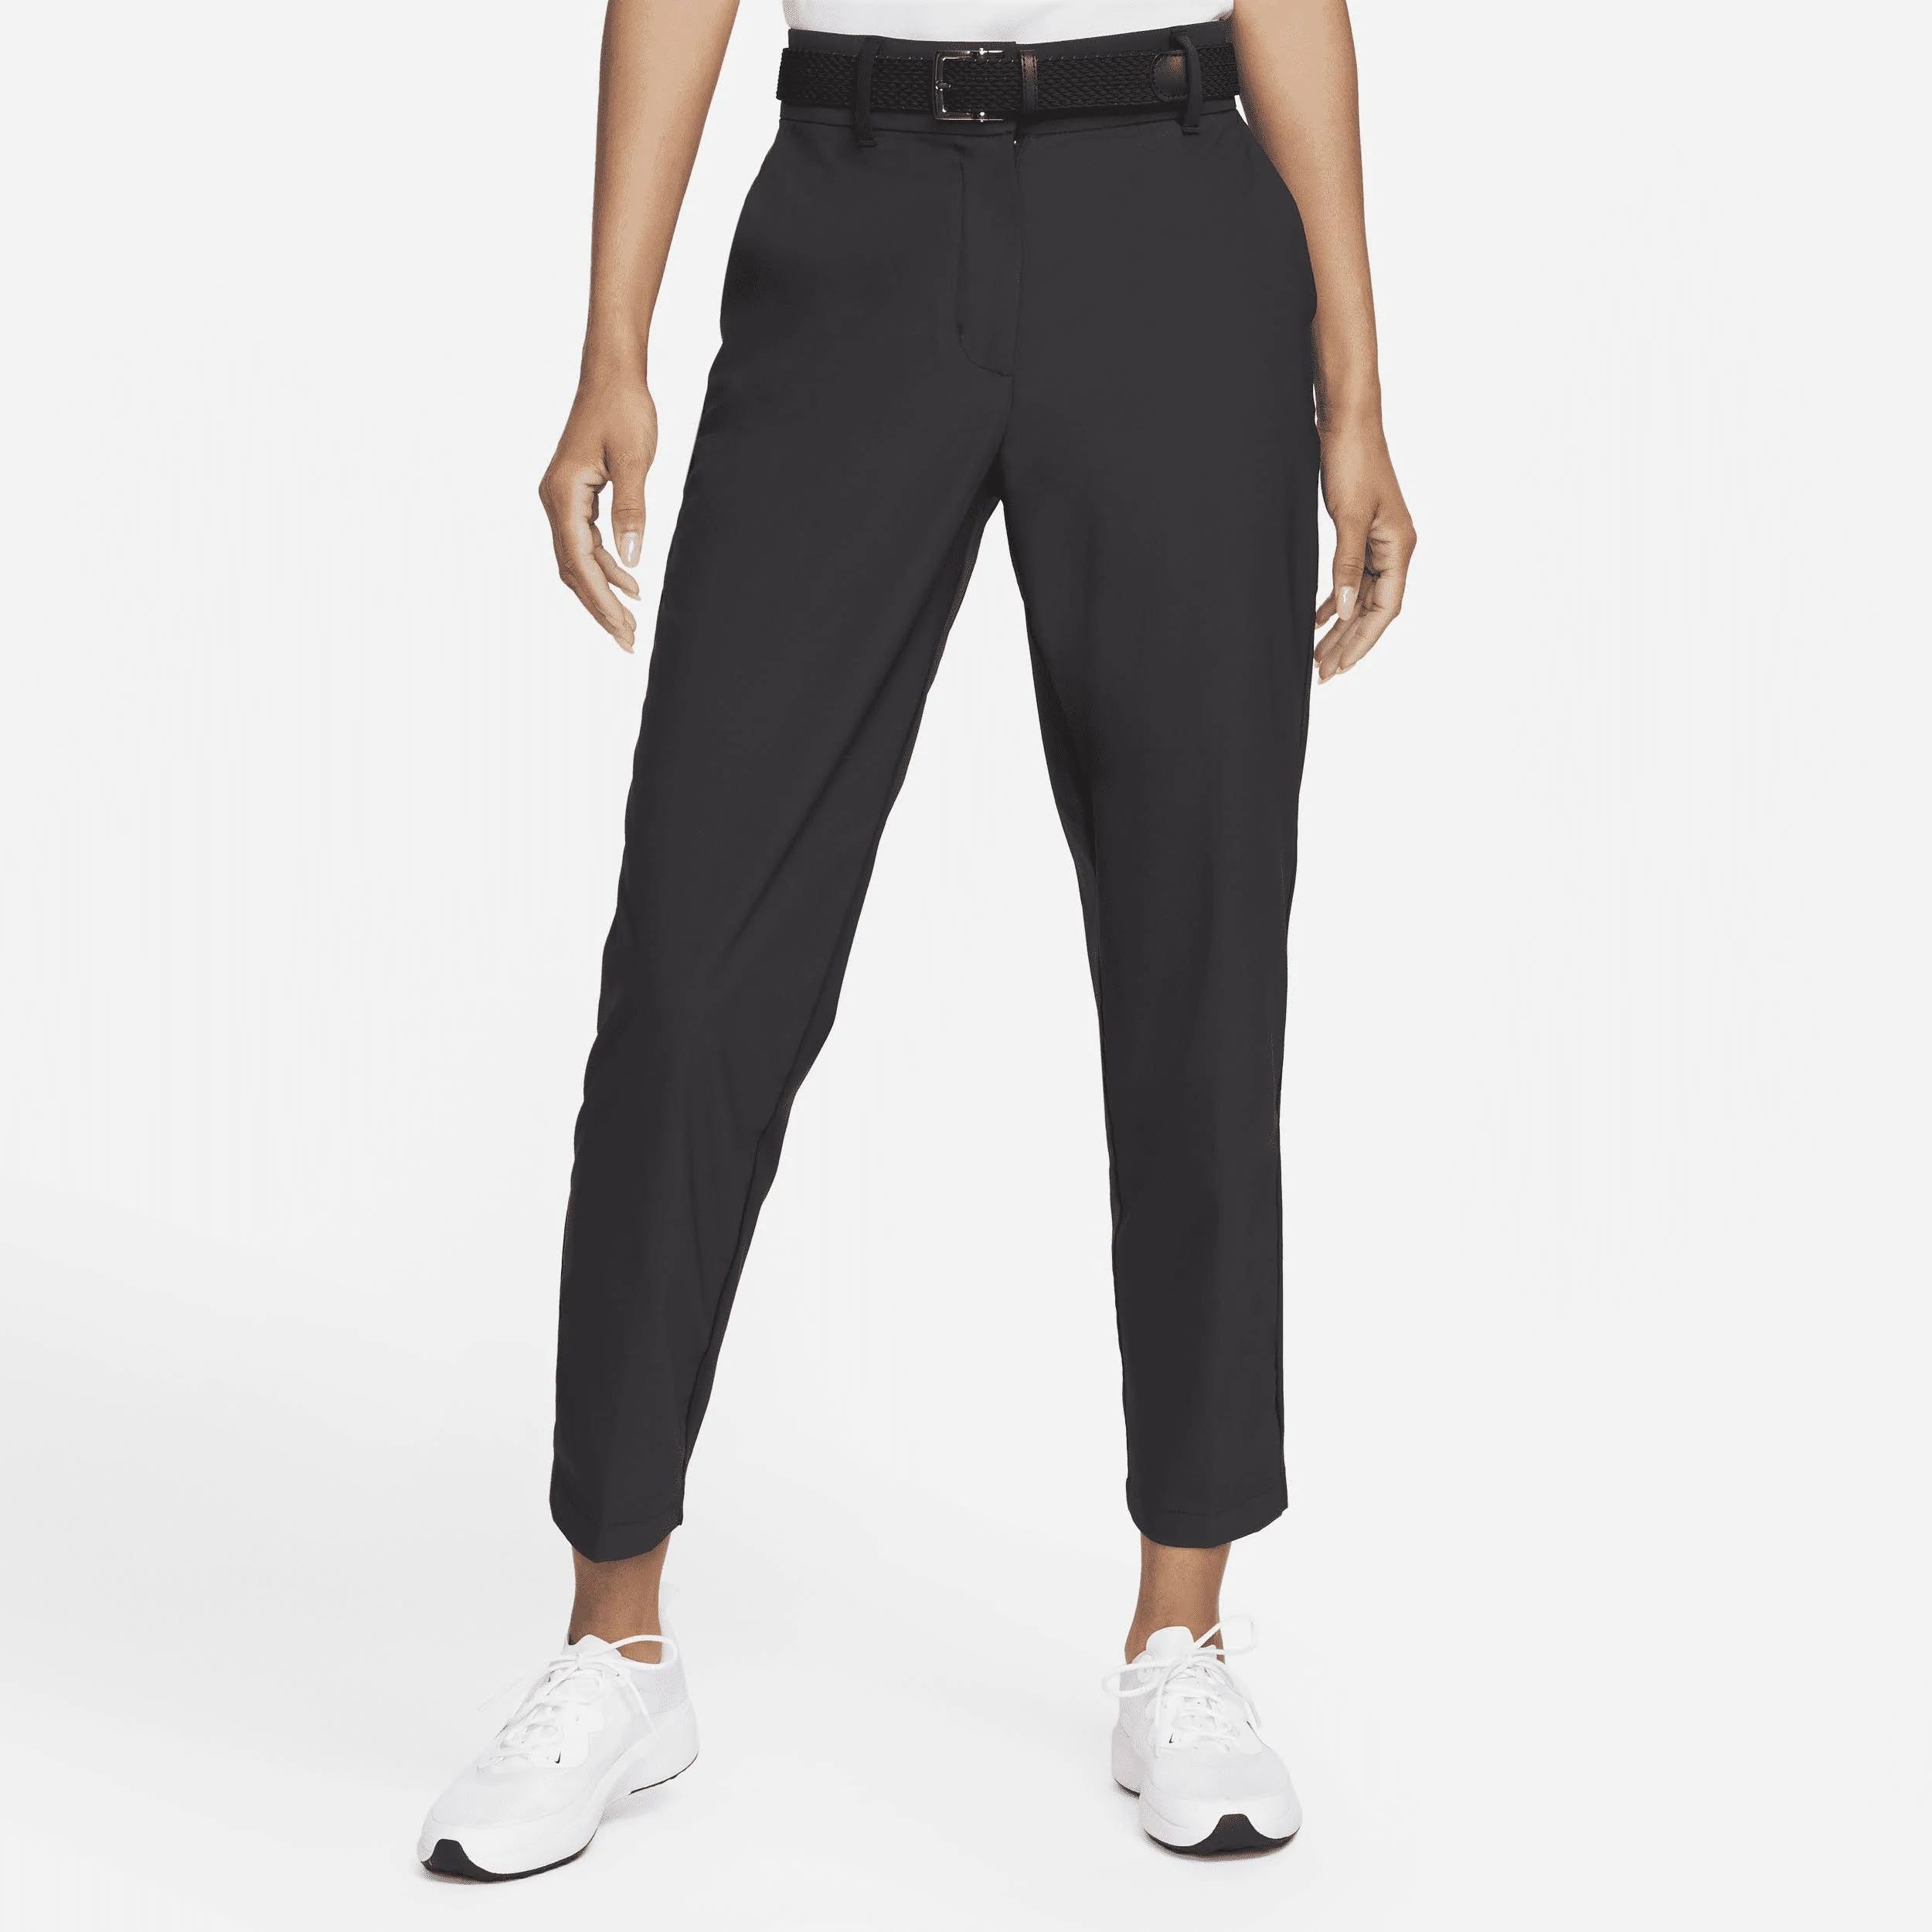 Stylish Nike Women's Dri-FIT Tour Golf Pants (DO6785) for Superior Comfort on the Course | Image